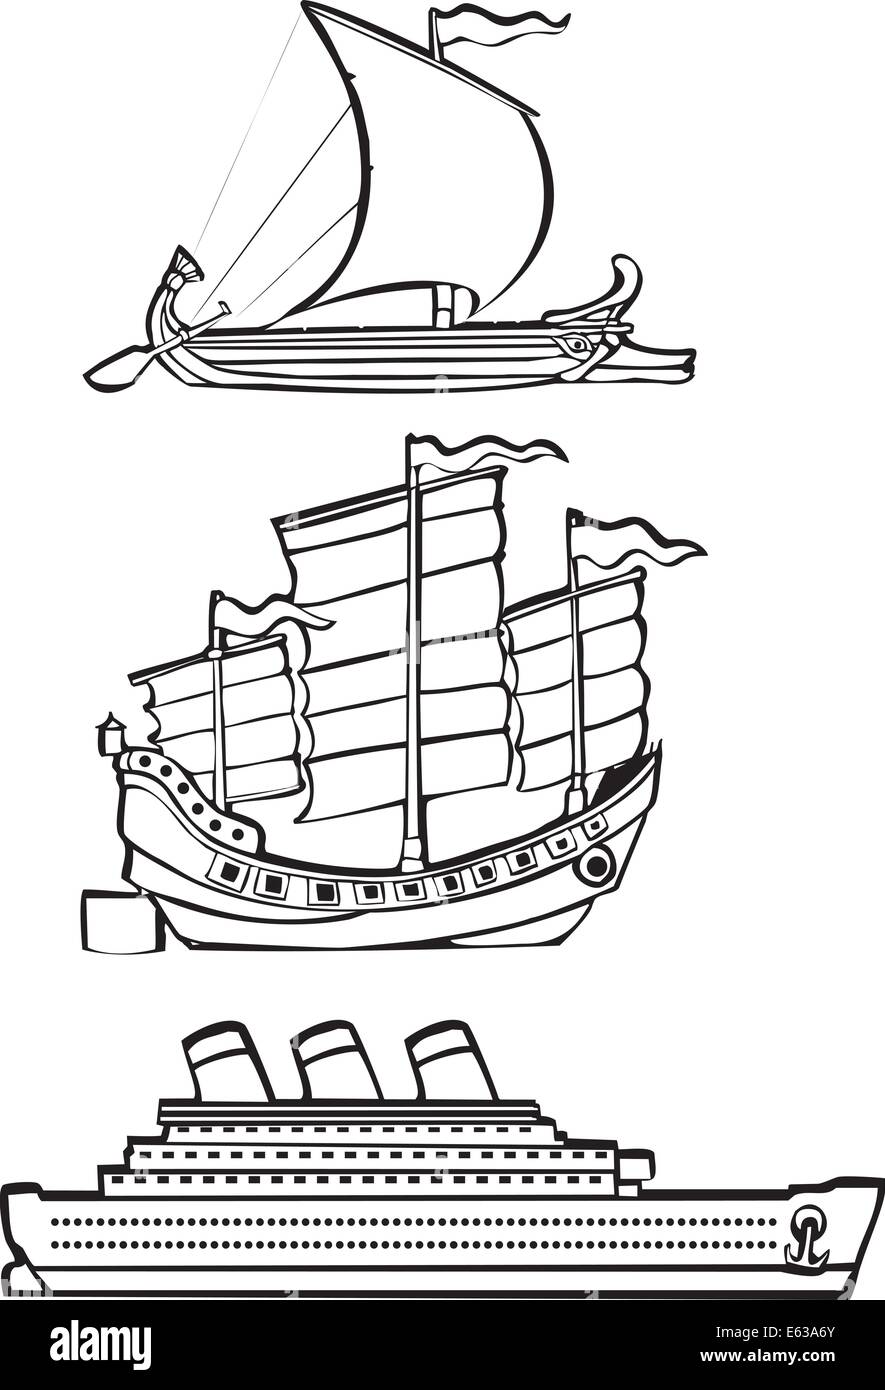 three simple ships from history illustrated in black and white. Stock Vector